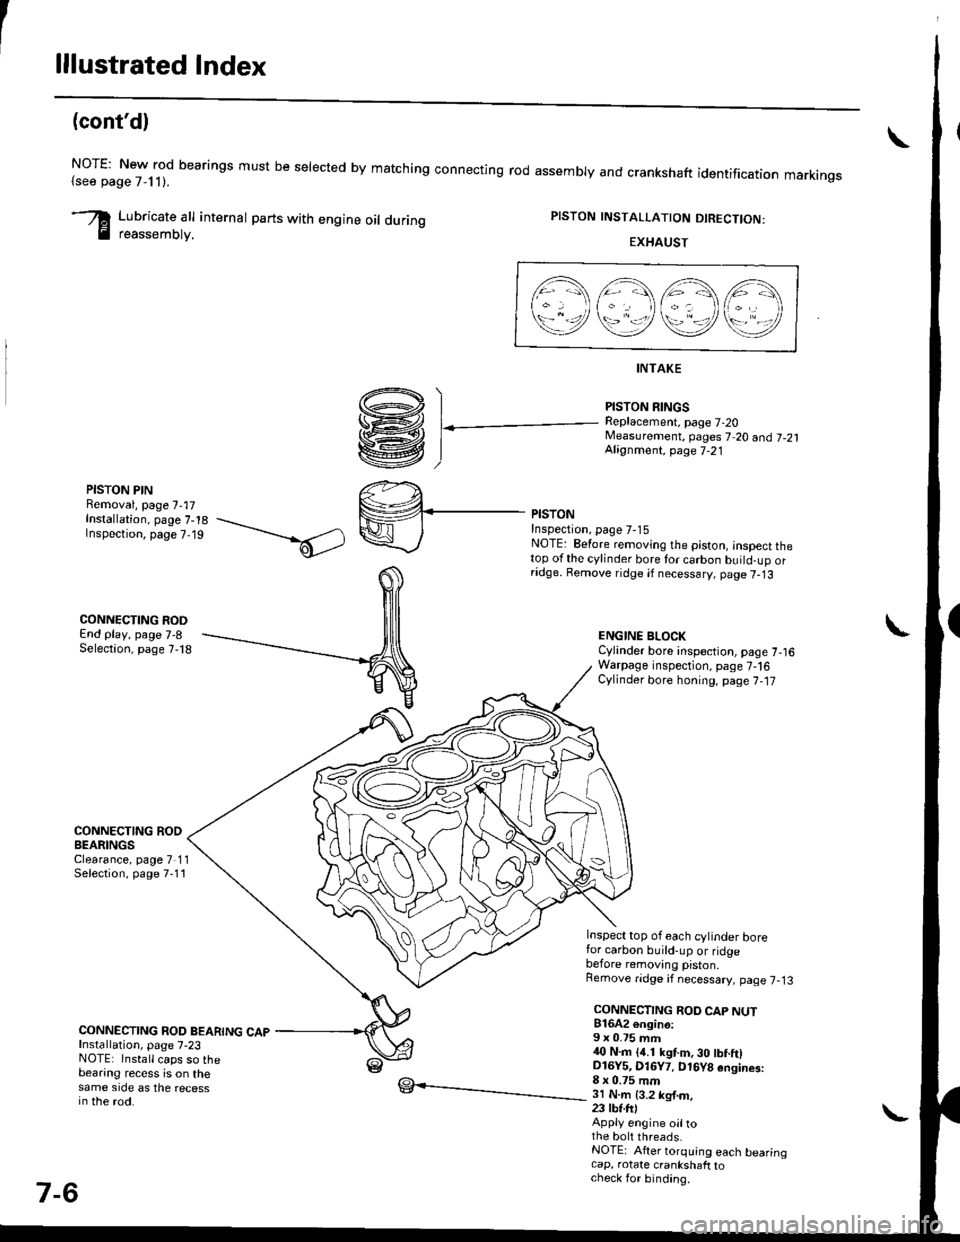 HONDA CIVIC 1996 6.G Workshop Manual lllustrated Index
(contd)
NOTE: New rod bearings must be selected by matching connecting rod assembly and crankshaft(see page 7,11).identification markings
Lubricate all internal parts with engine oi